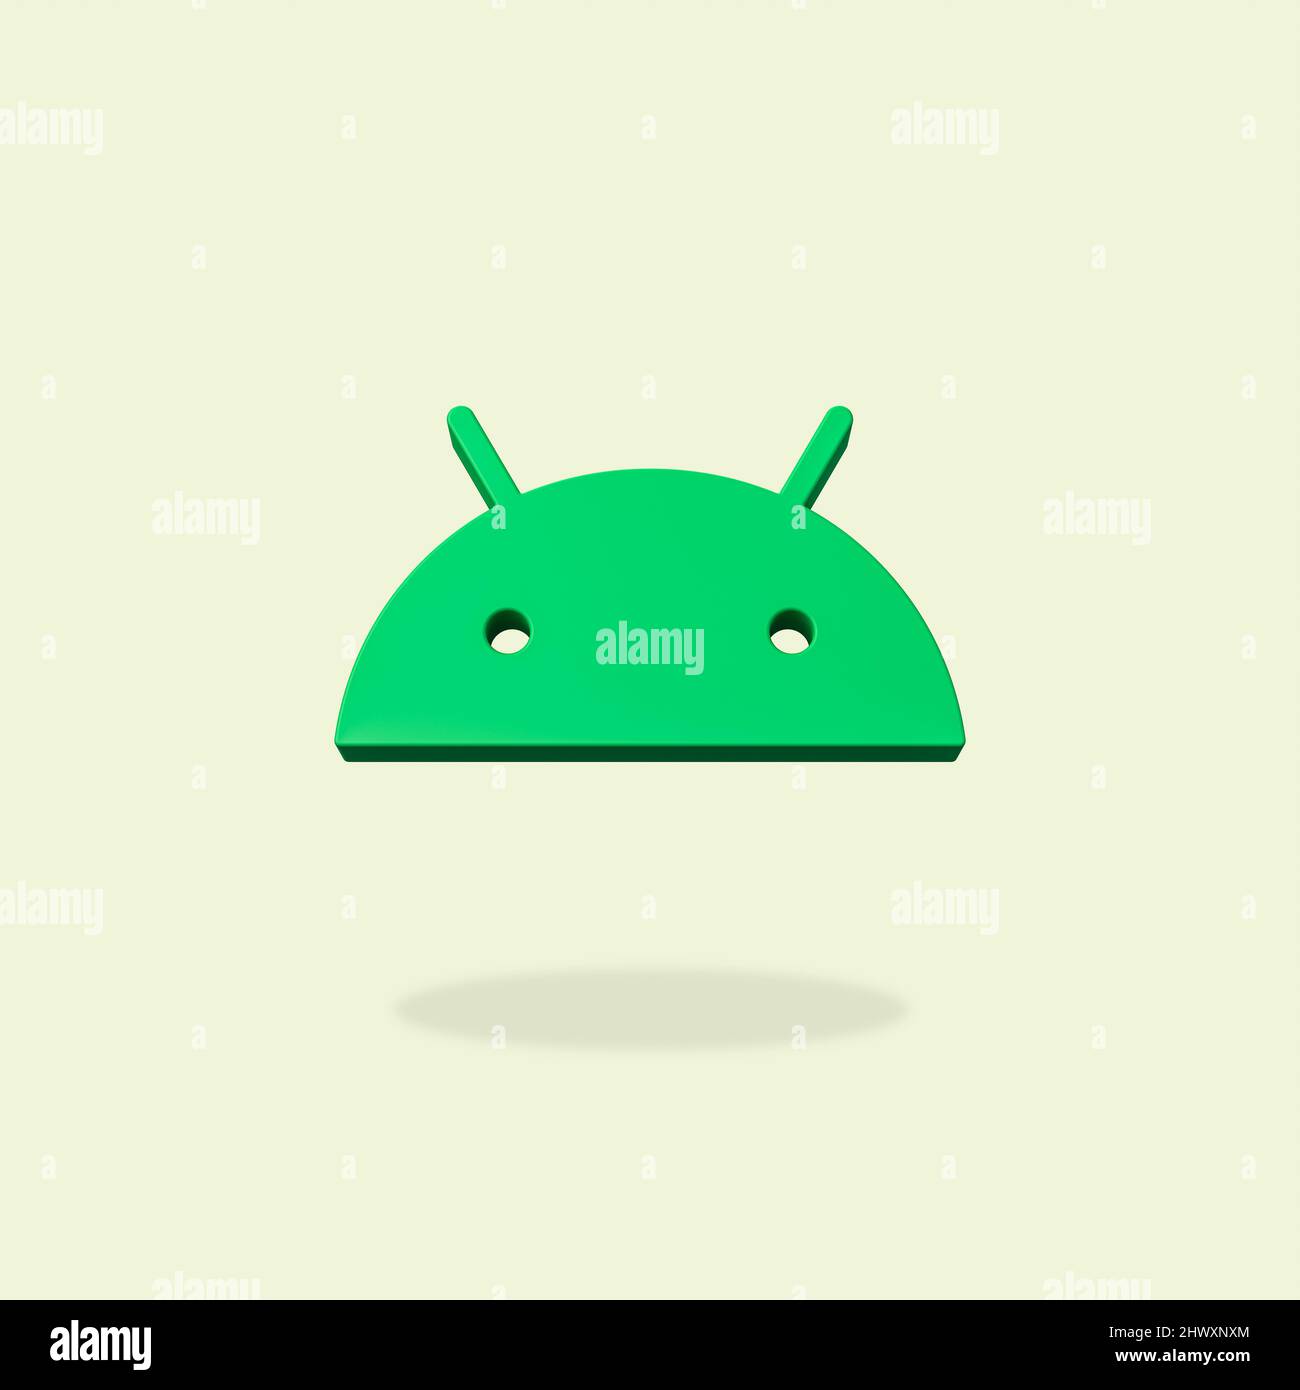 Android OS Logo on Flat Yellow Background Stock Photo